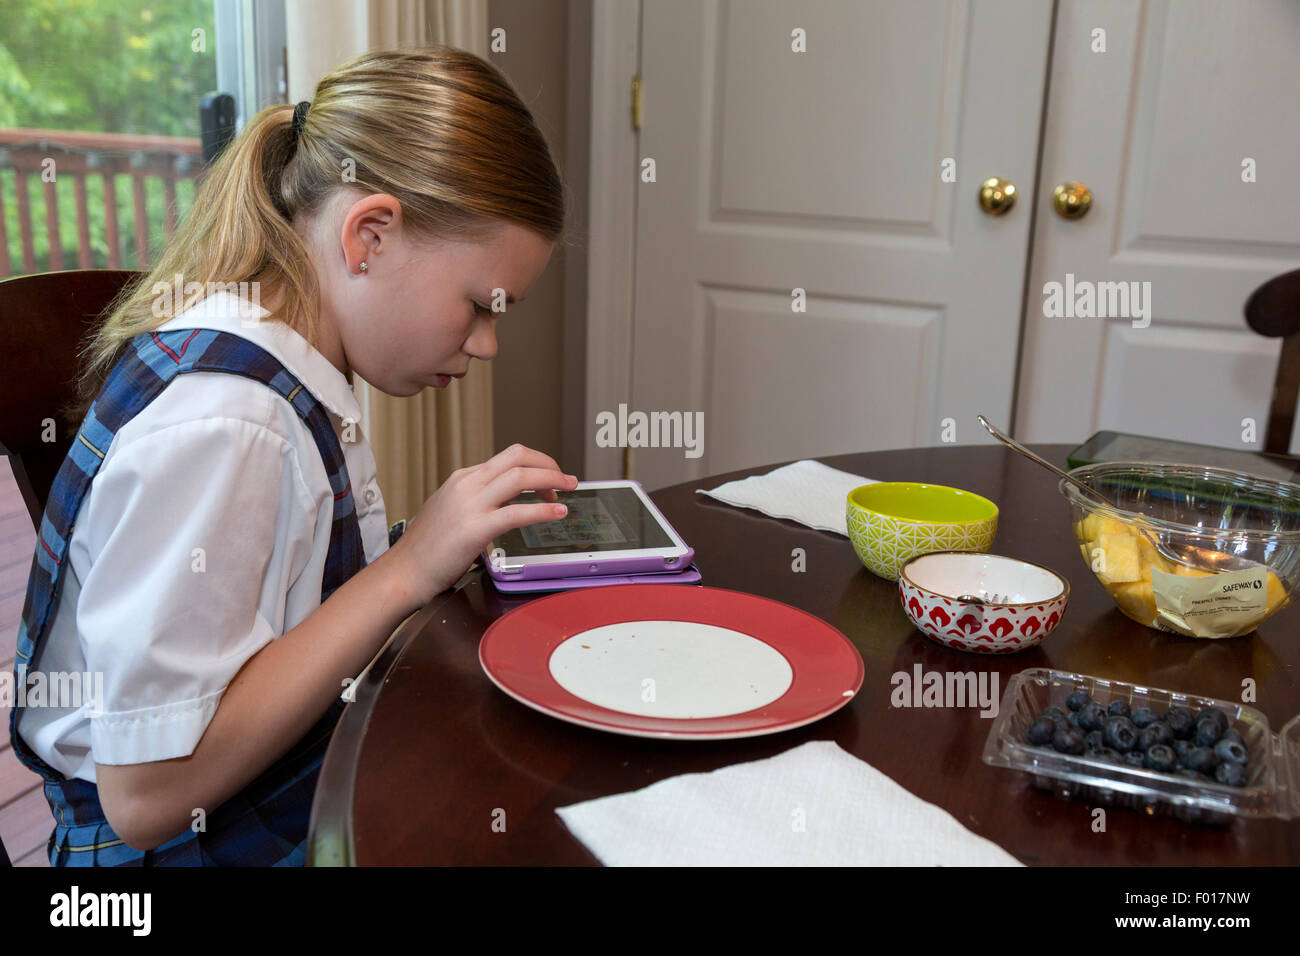 Today's Modern Elementary School Student:  Playing a game on her iPad at Breakfast.  MR Stock Photo